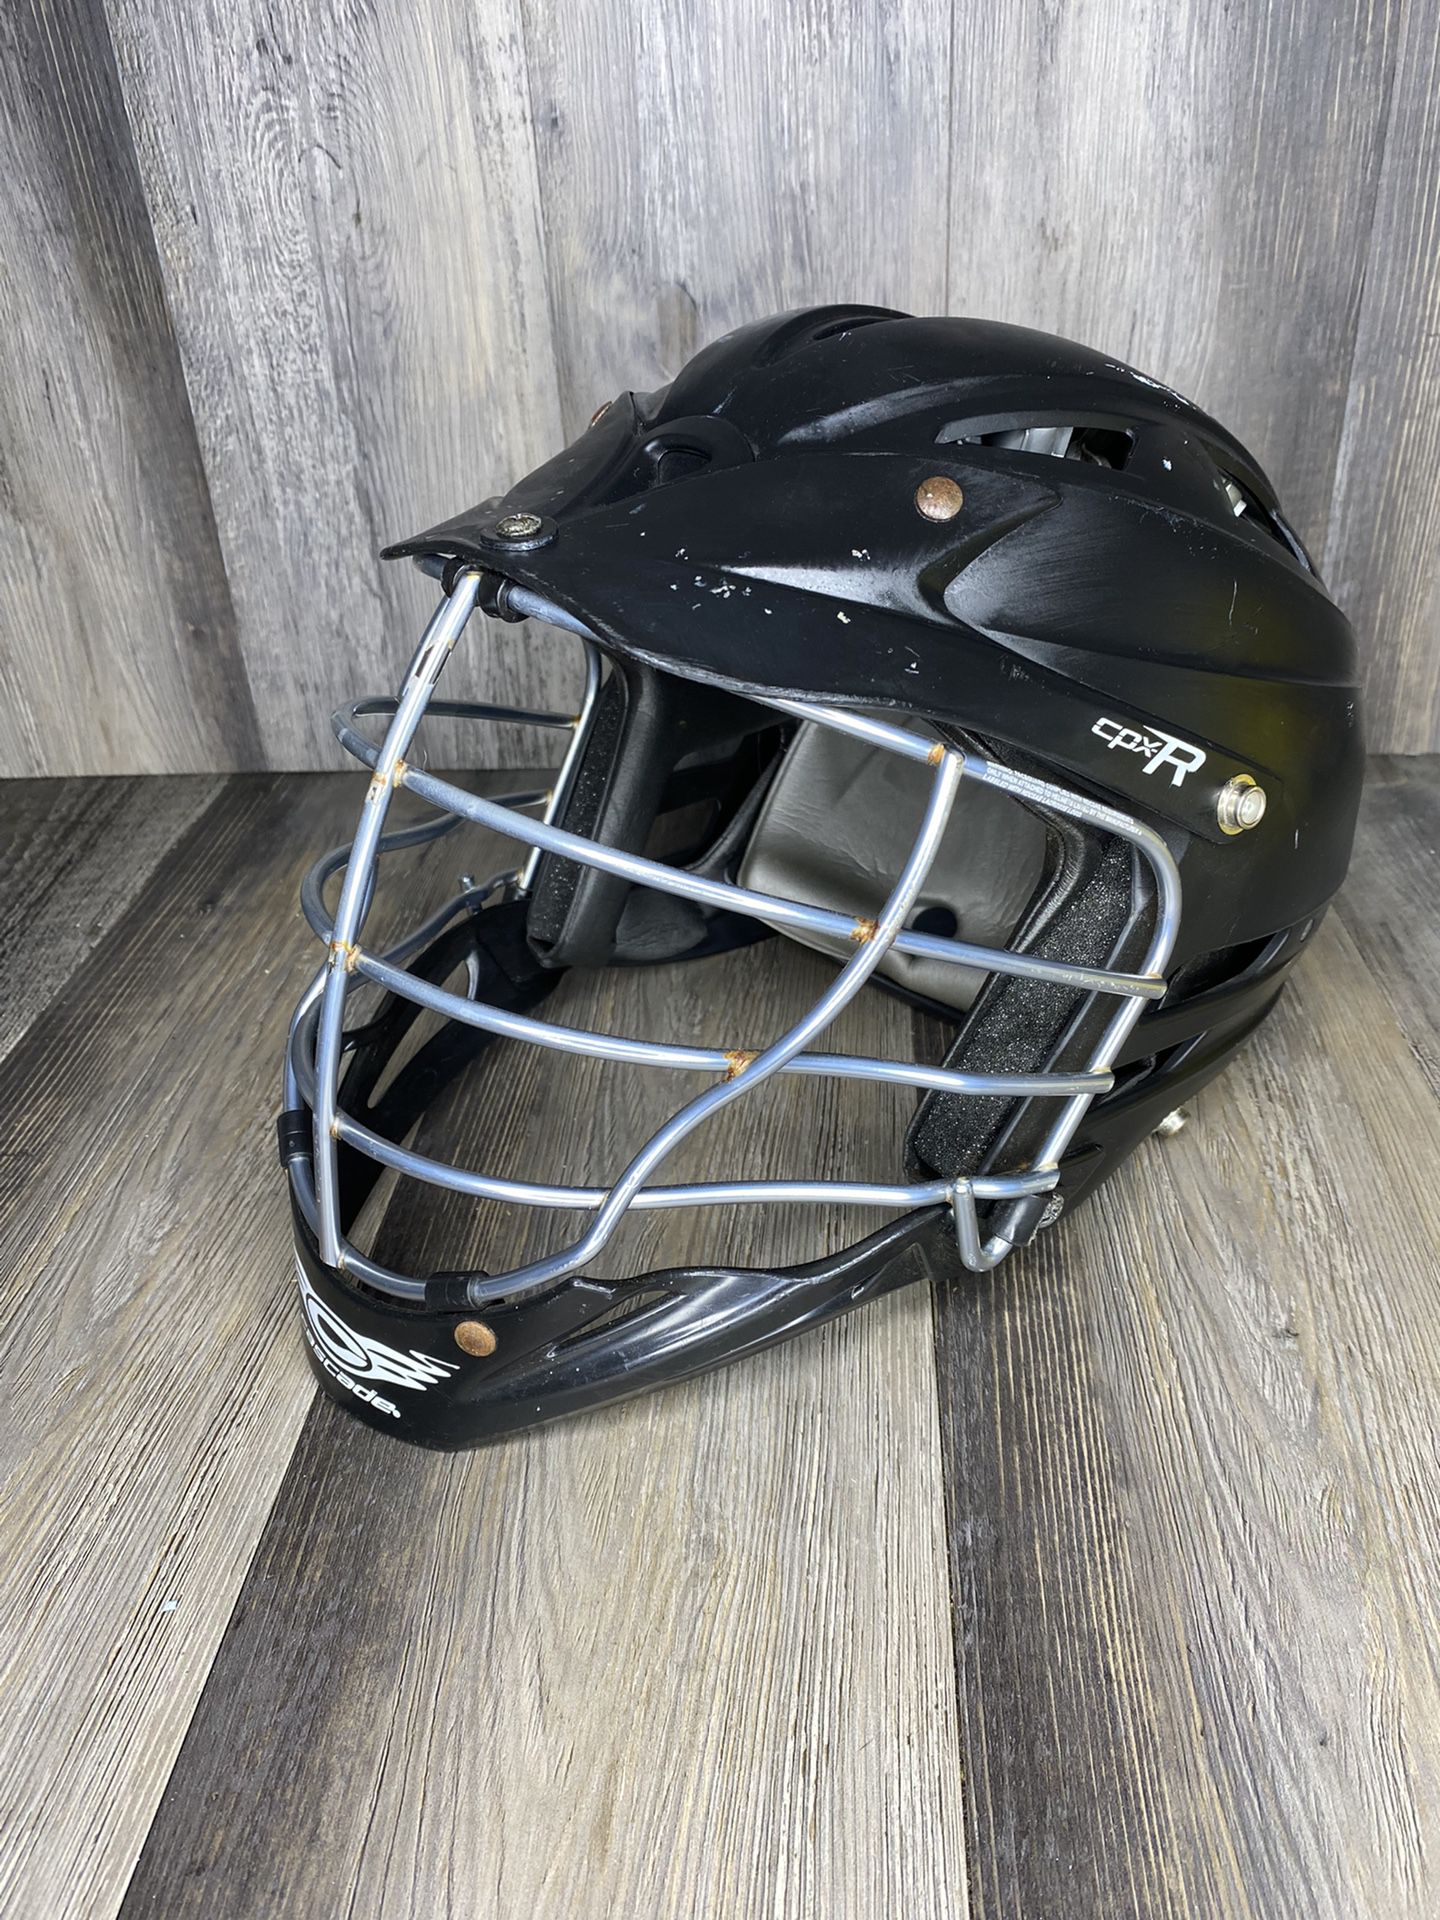 Cascade CPX-R Lacrosse LAX Helmet Black CPXR Standard Size Fits Most